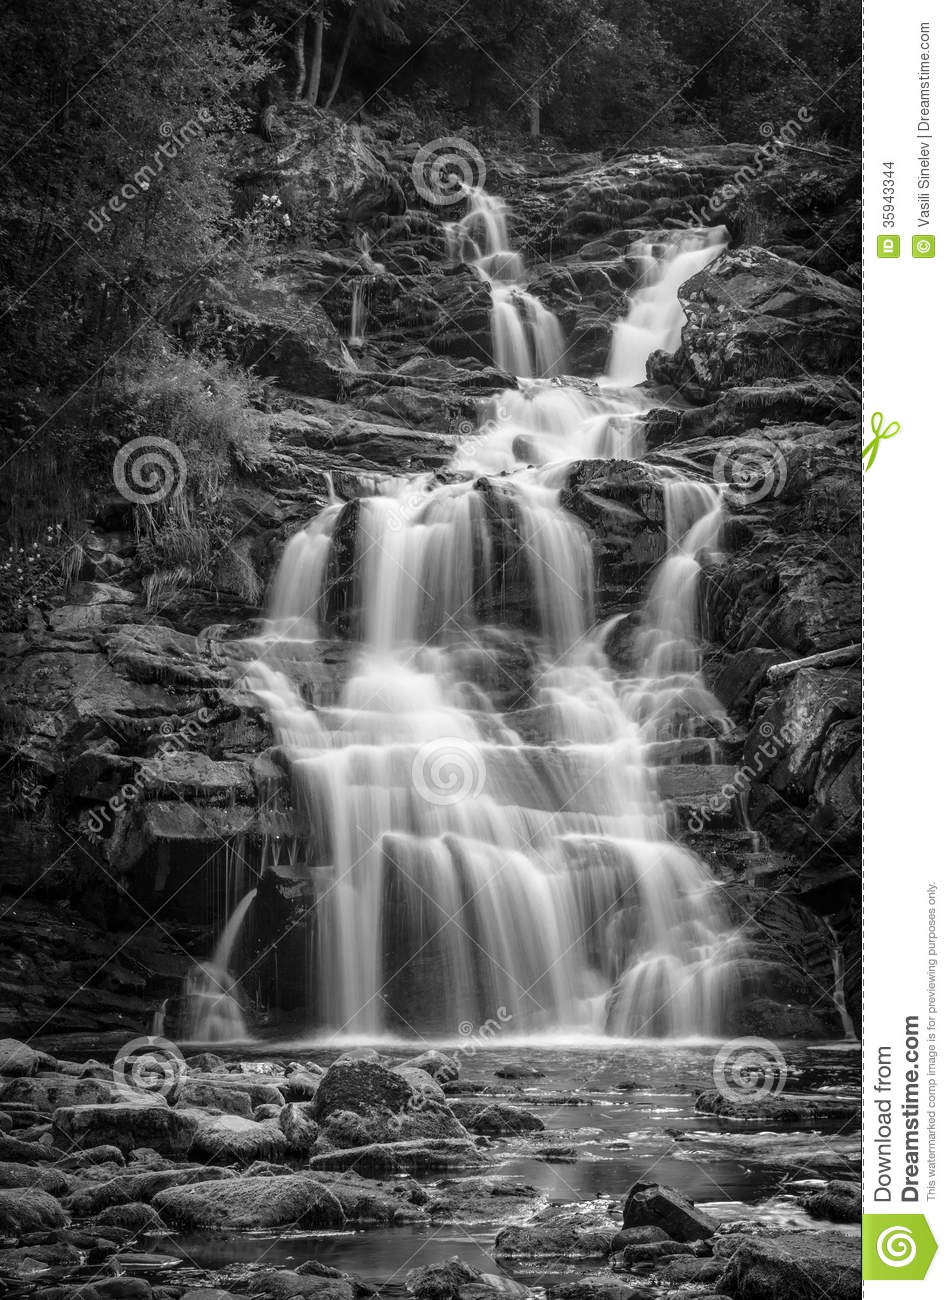 Black And White Pictures Of Waterfalls Black And White Shot Of High